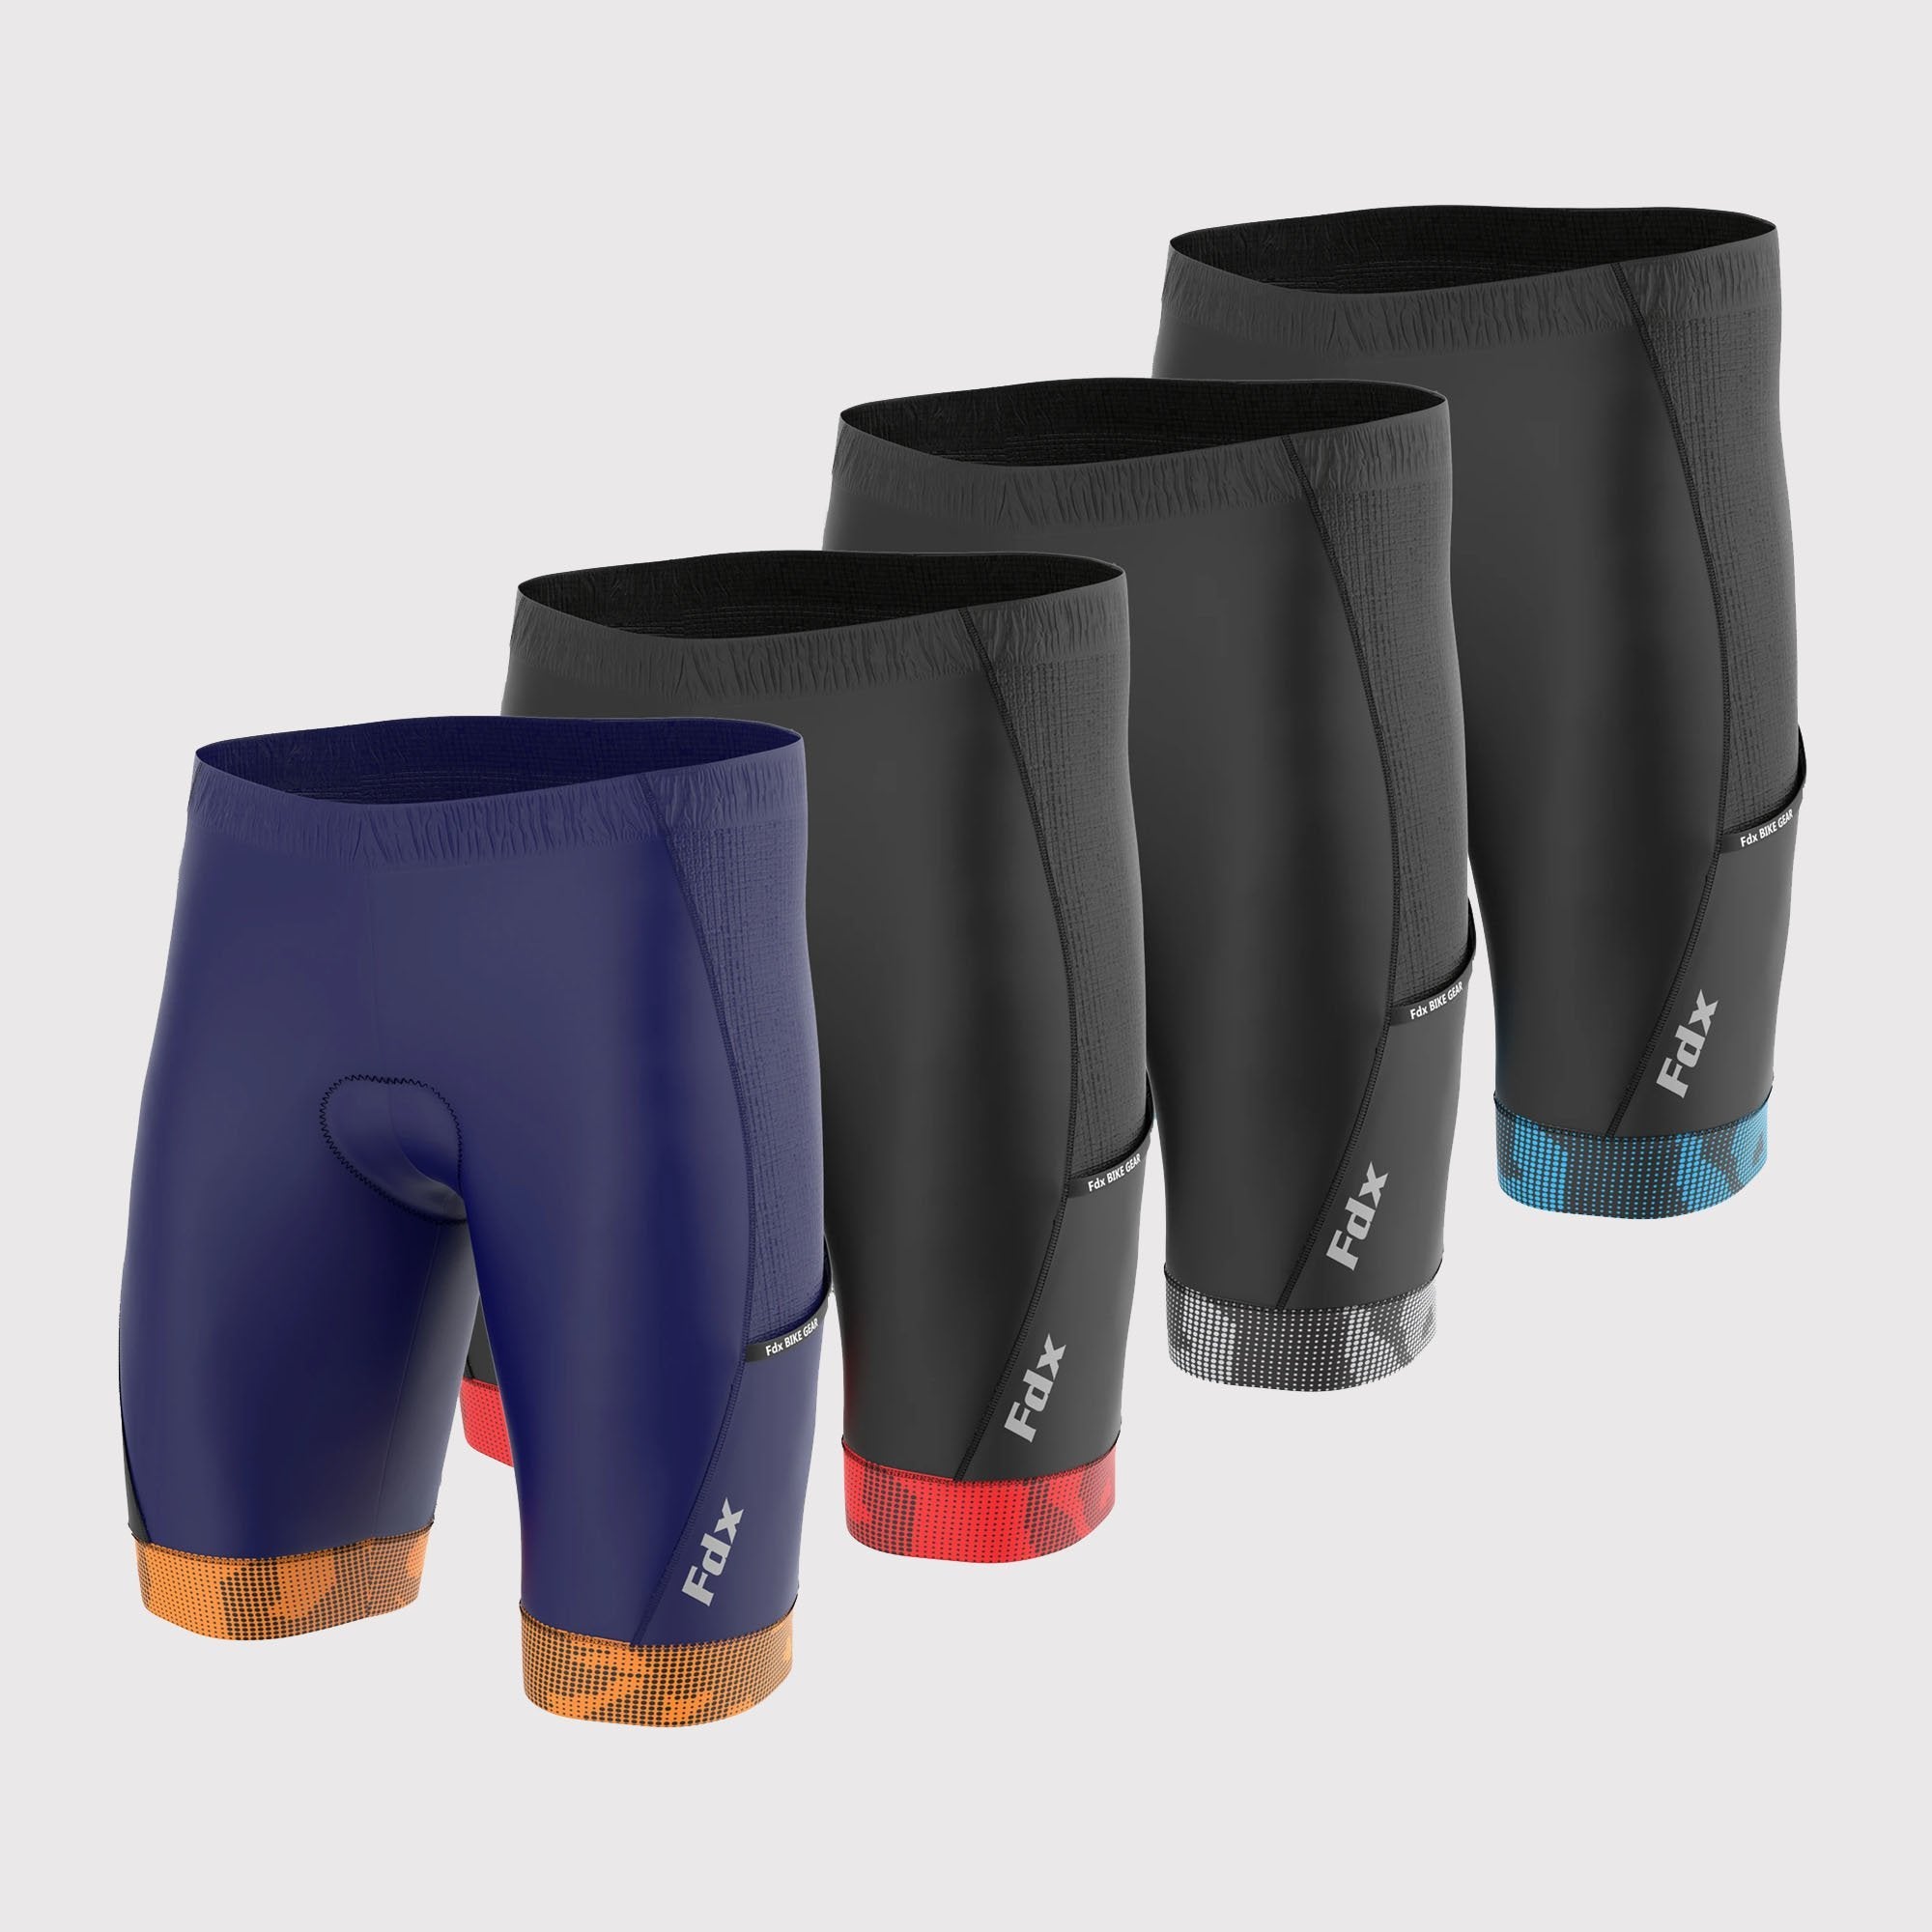 Fdx All Day Men's Gel Padded Summer Cycling Shorts Red, Grey, Blue & Navy  Blue